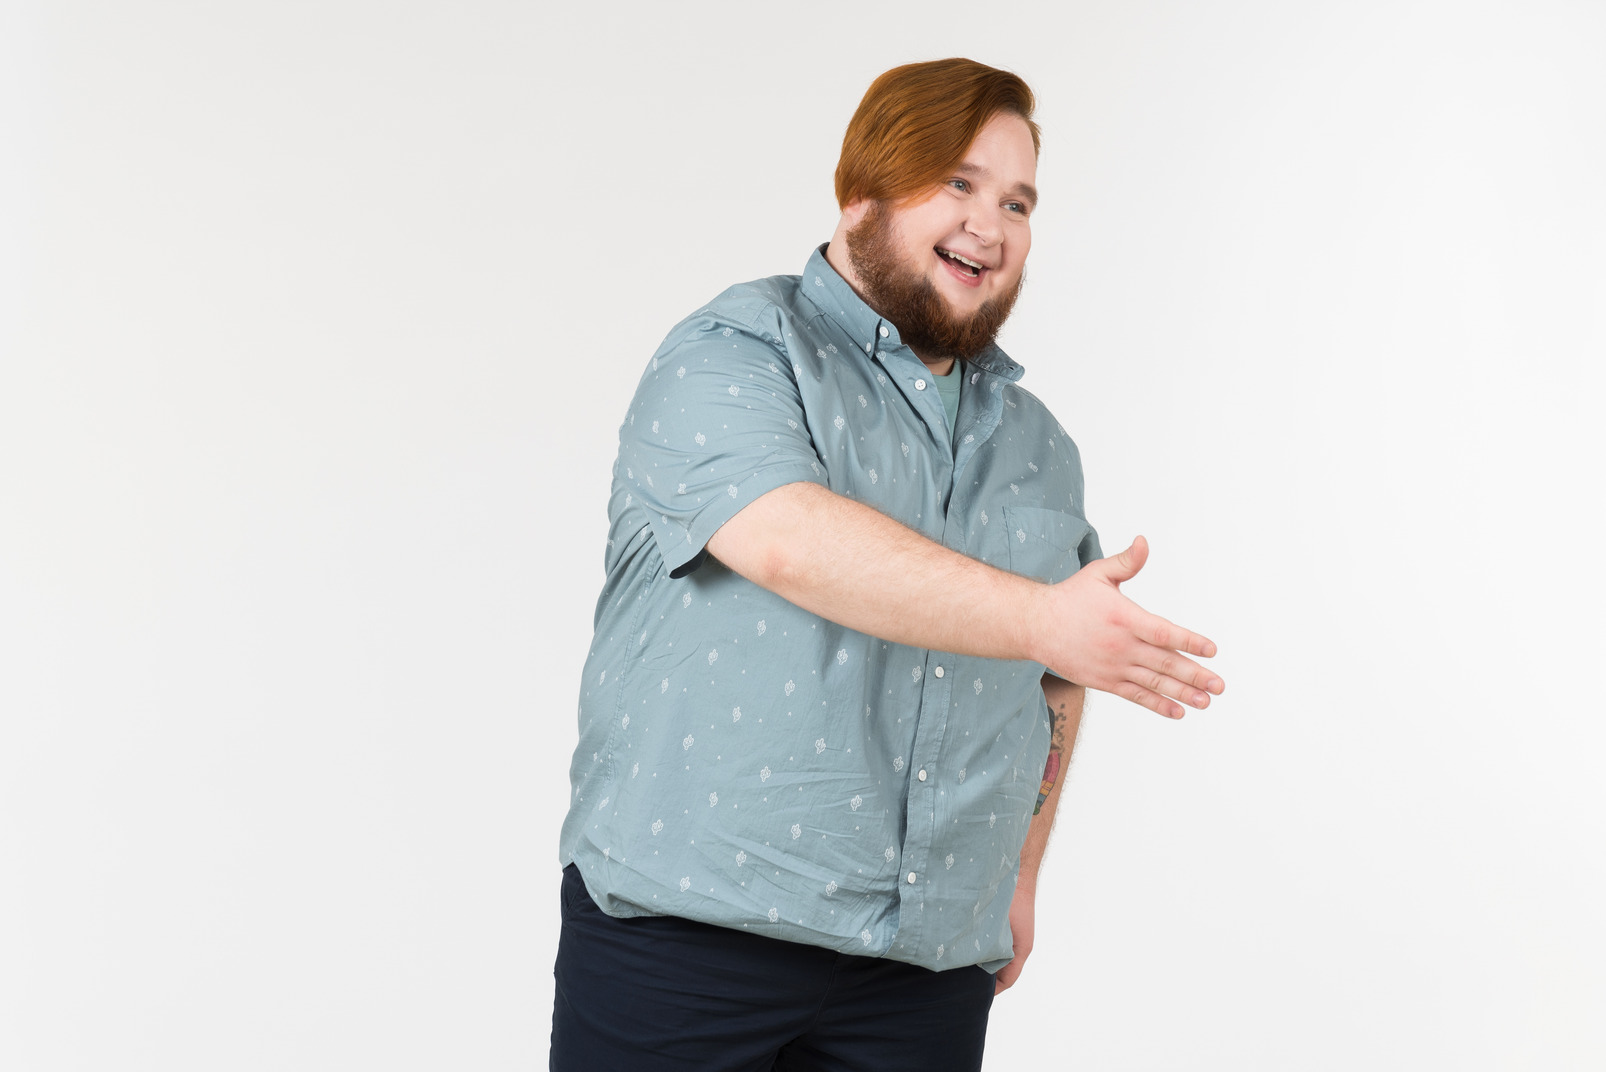 A fat man offering his hand to someone and smiling widely